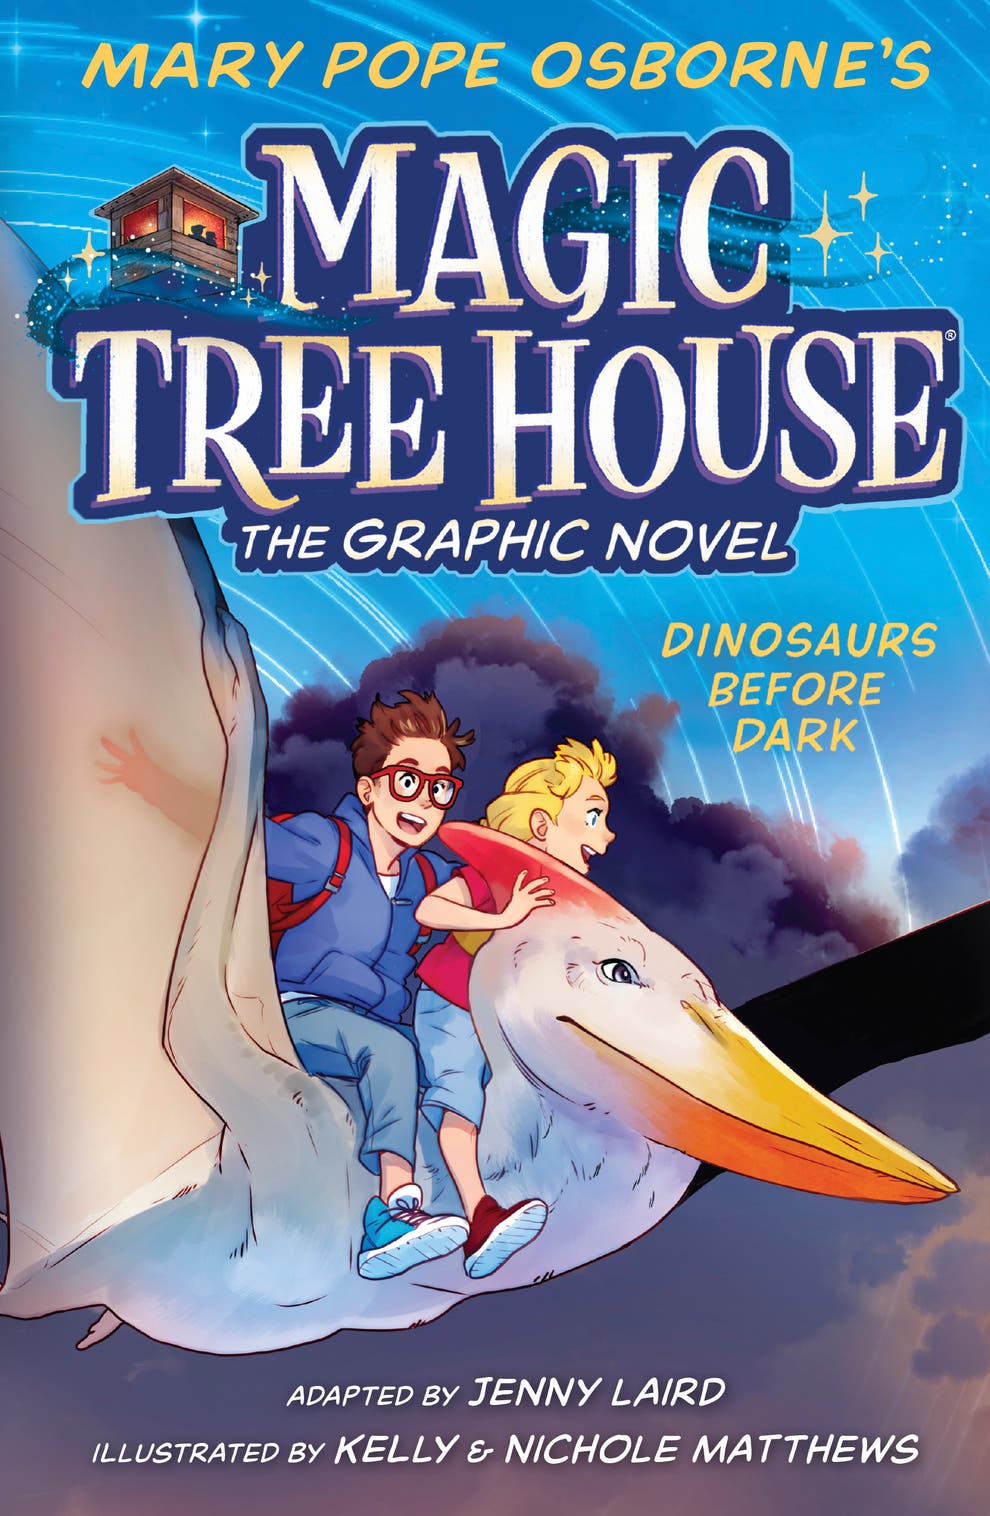 magic-tree-house-books-to-be-adapted-into-graphic-novels-new-york